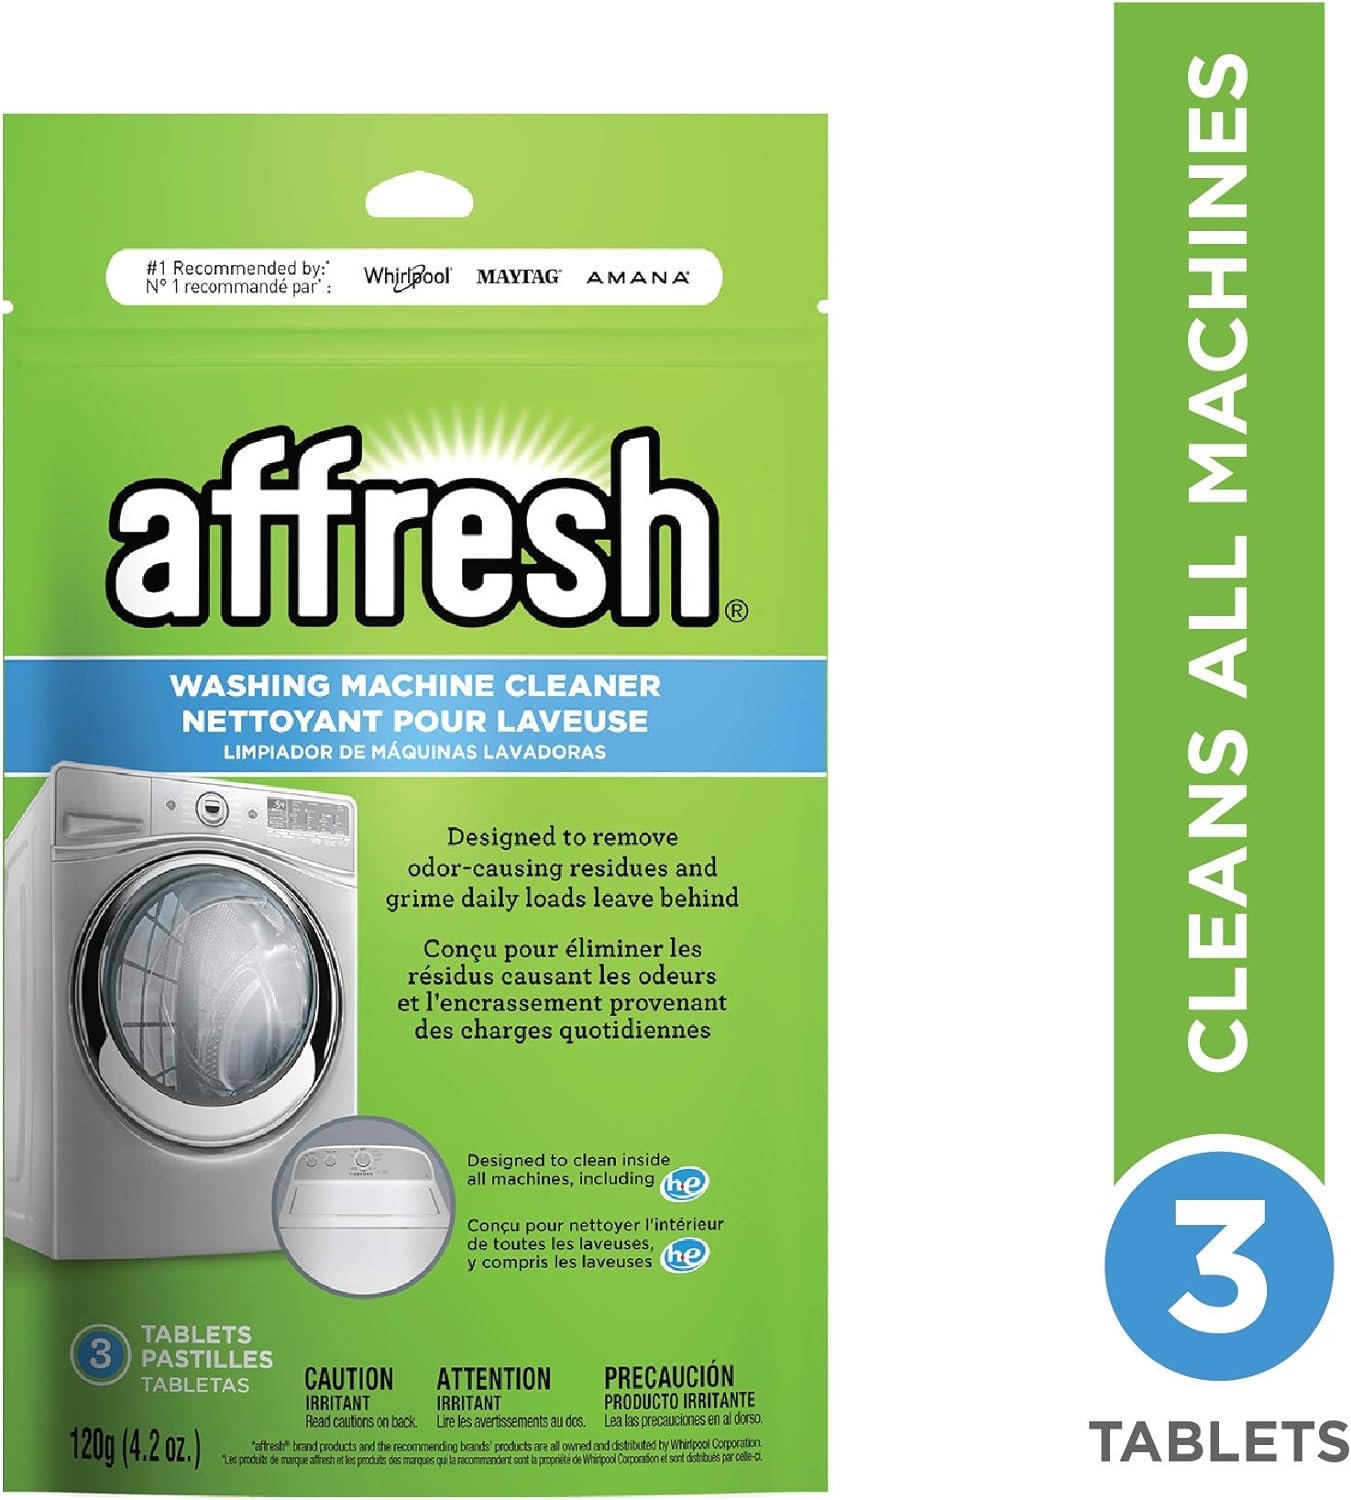 Affresh W10135699 Whirlpool - High Efficiency Washer Cleaner, 3-Tablets, 4.2 Ounce